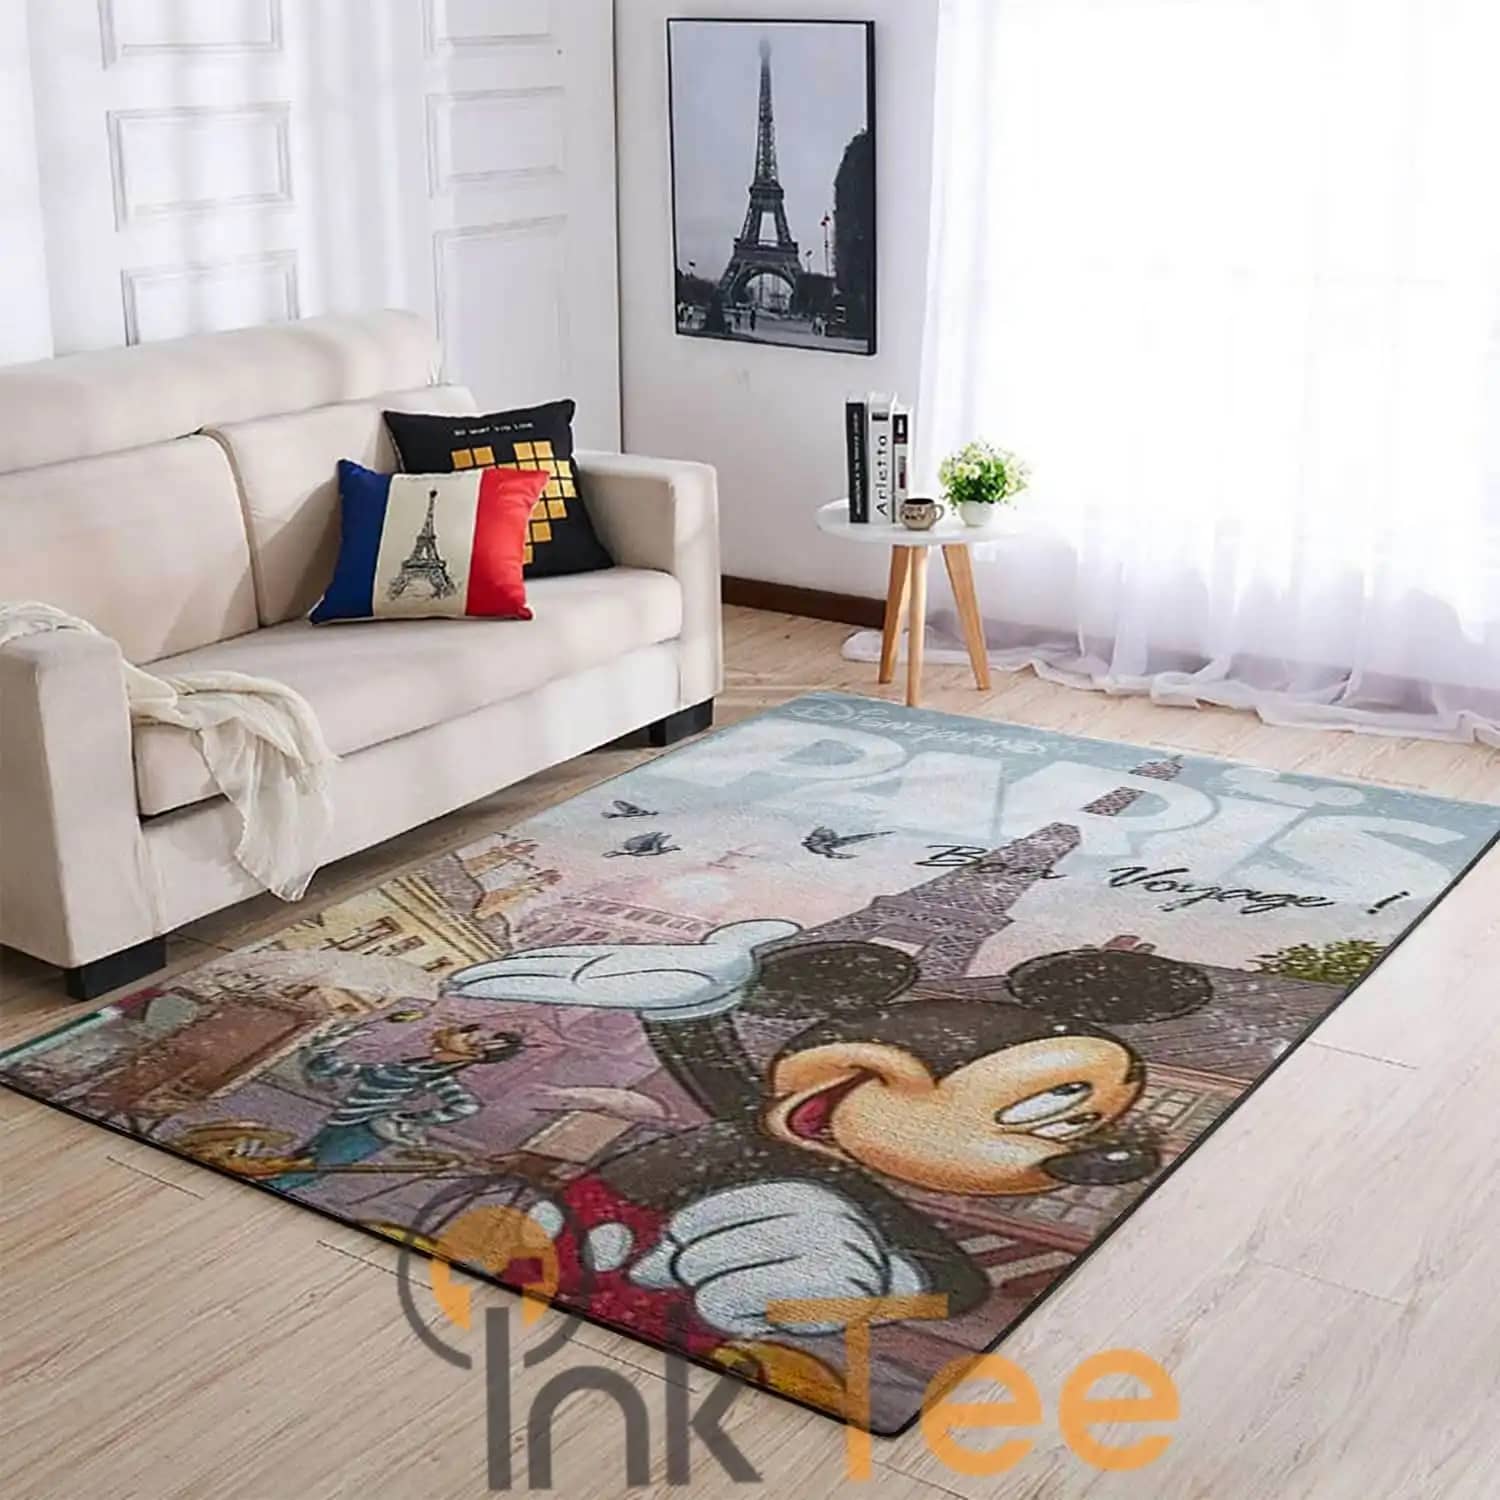 Disney Mickey Mouse Living Room Area Amazon Best Seller 4099 Rug